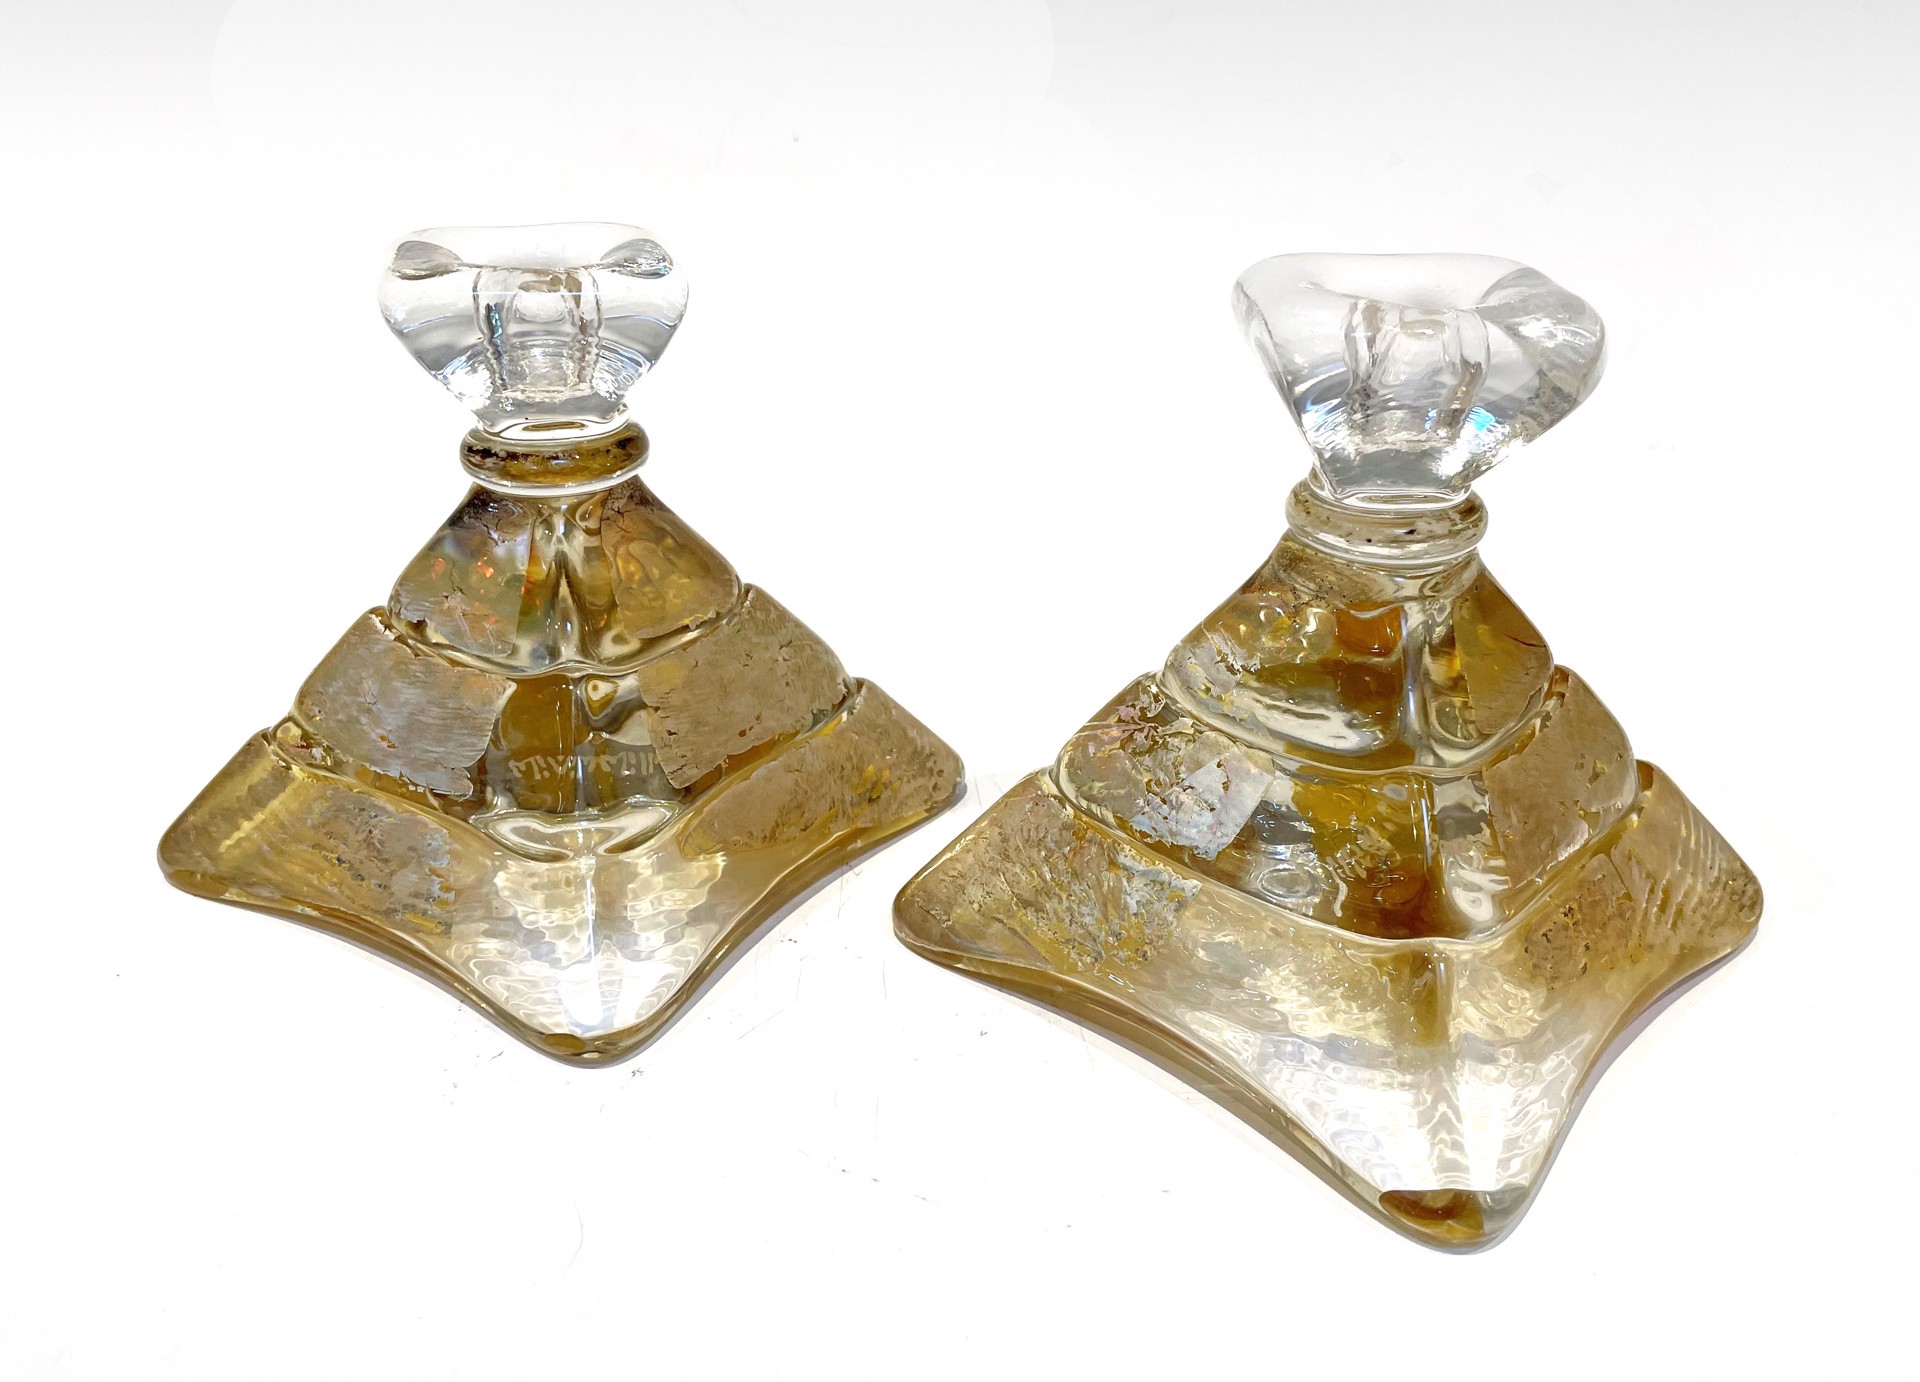 Candleholders ~ Gold on Gold by Paul Willsea & Carol O'Brien